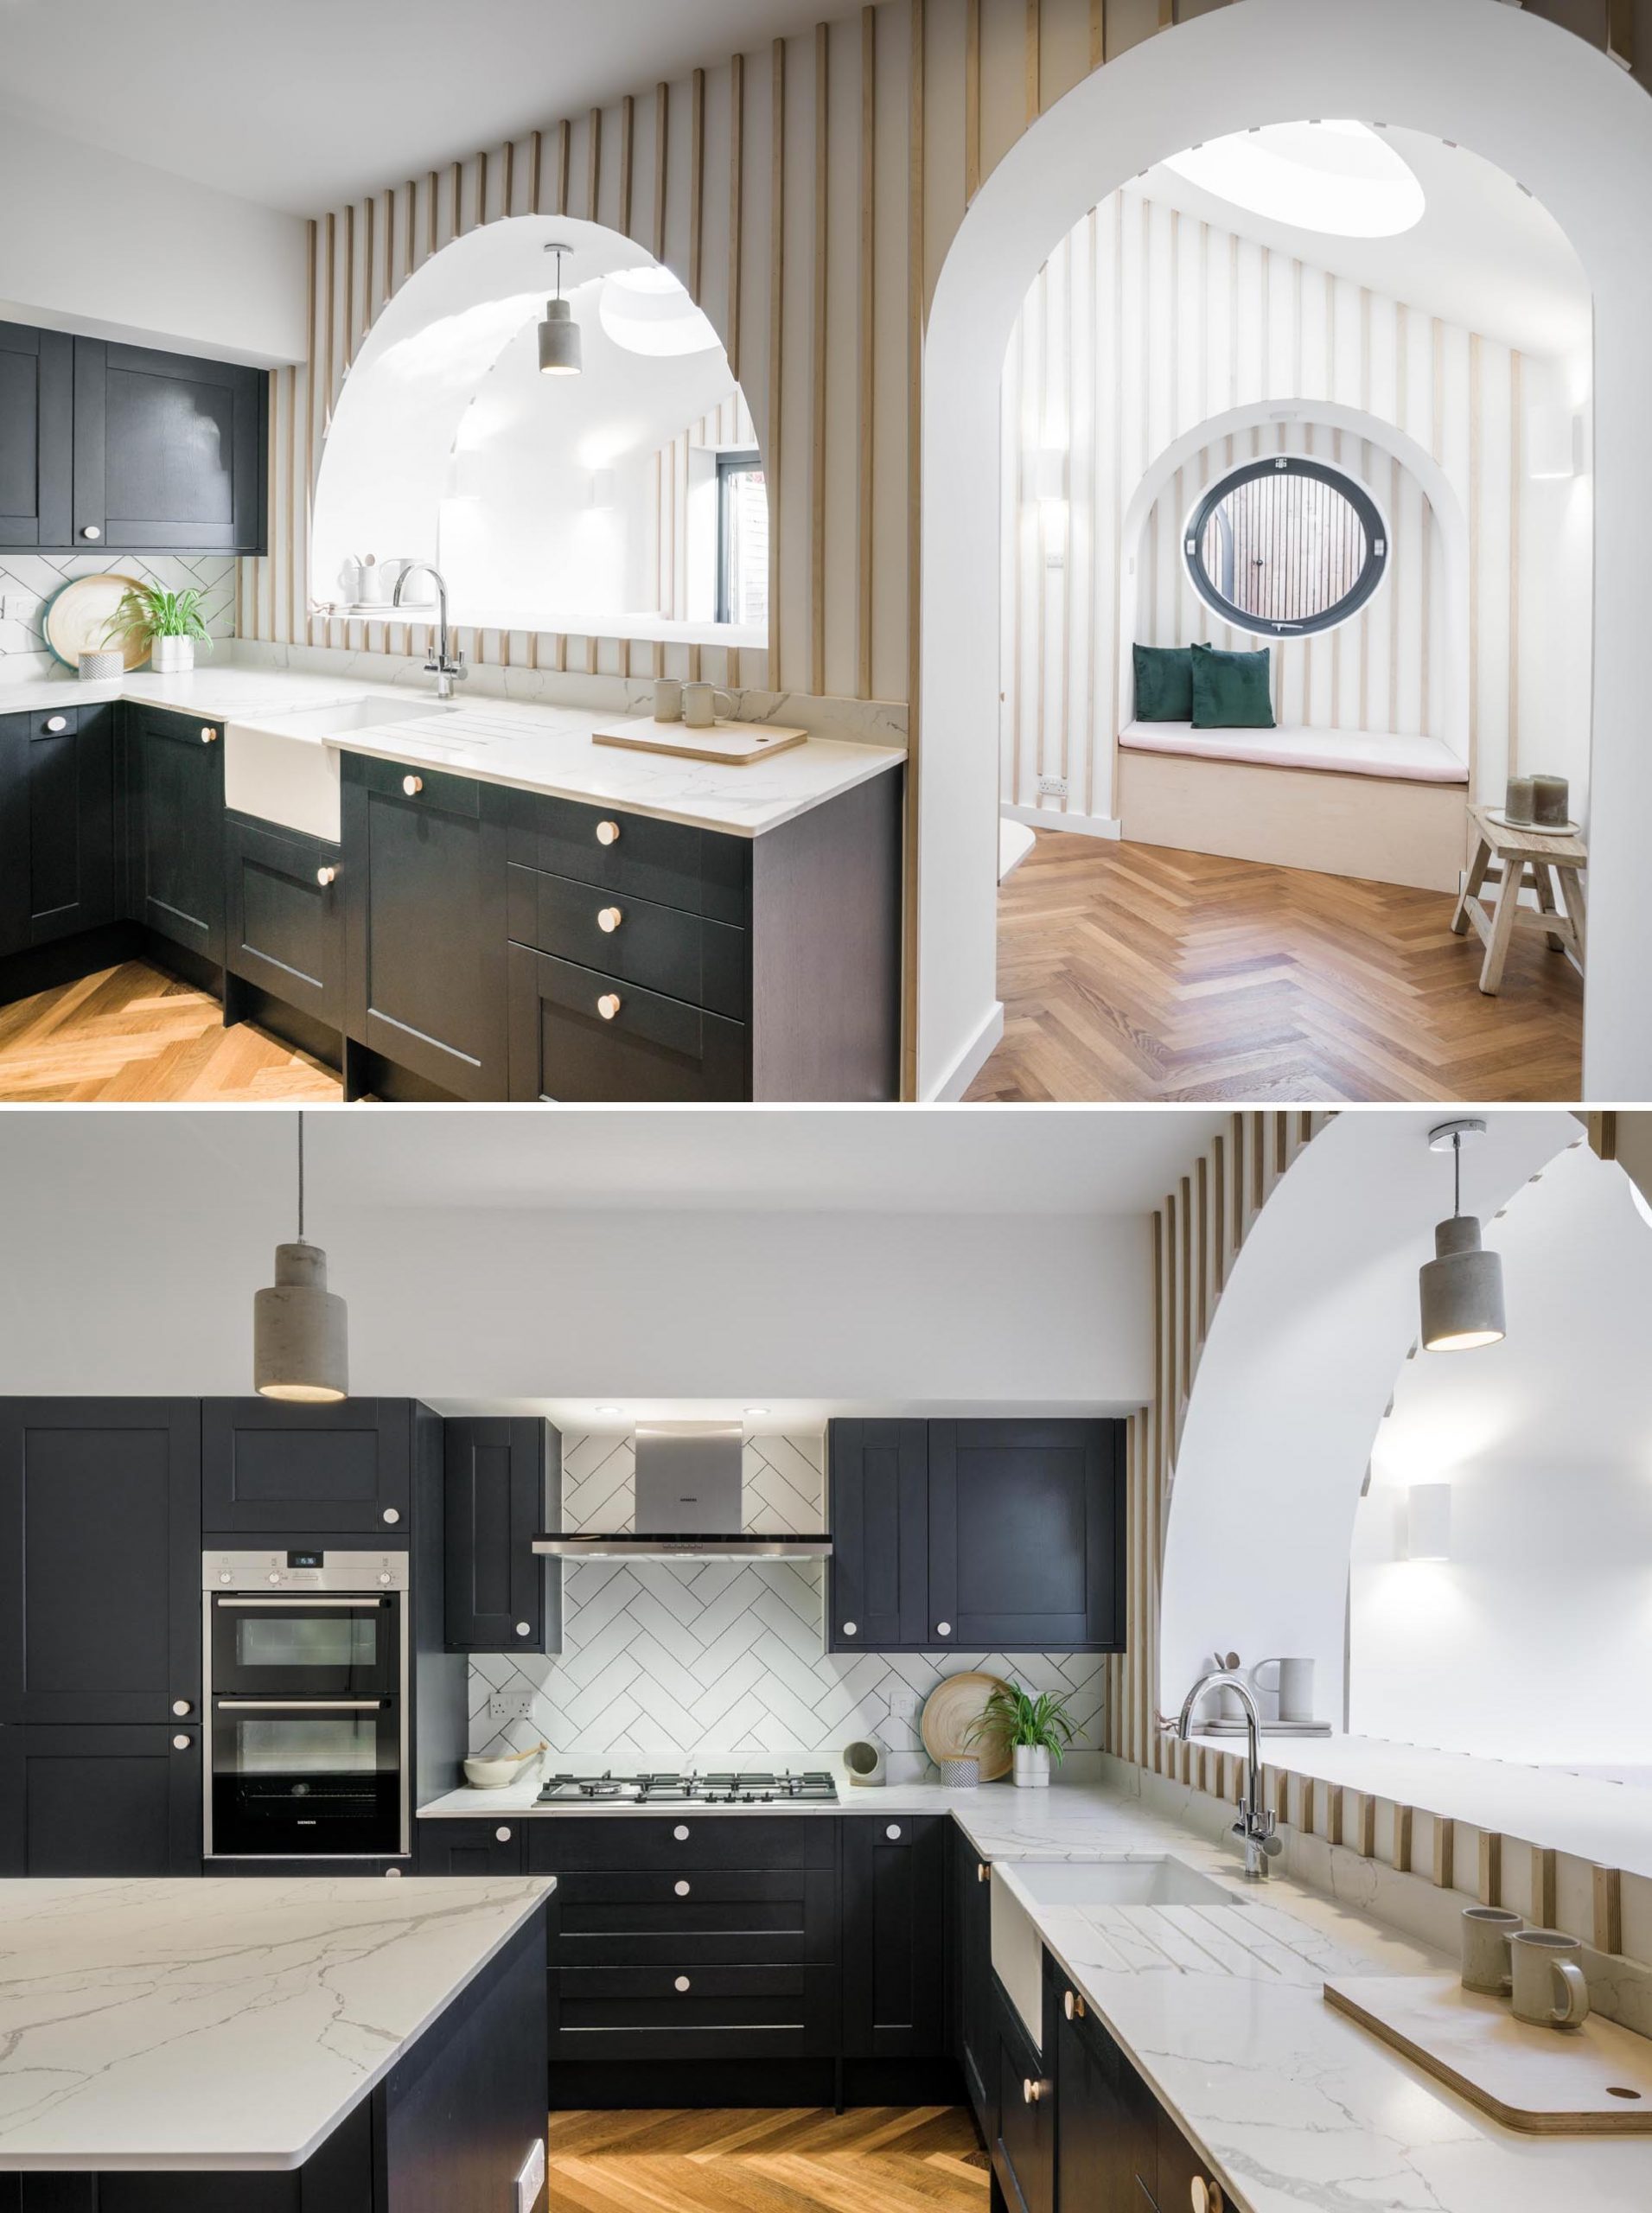 In this contemporary kitchen, black cabinets contrast the white countertop, while an arched pass-through connects to the dining area.